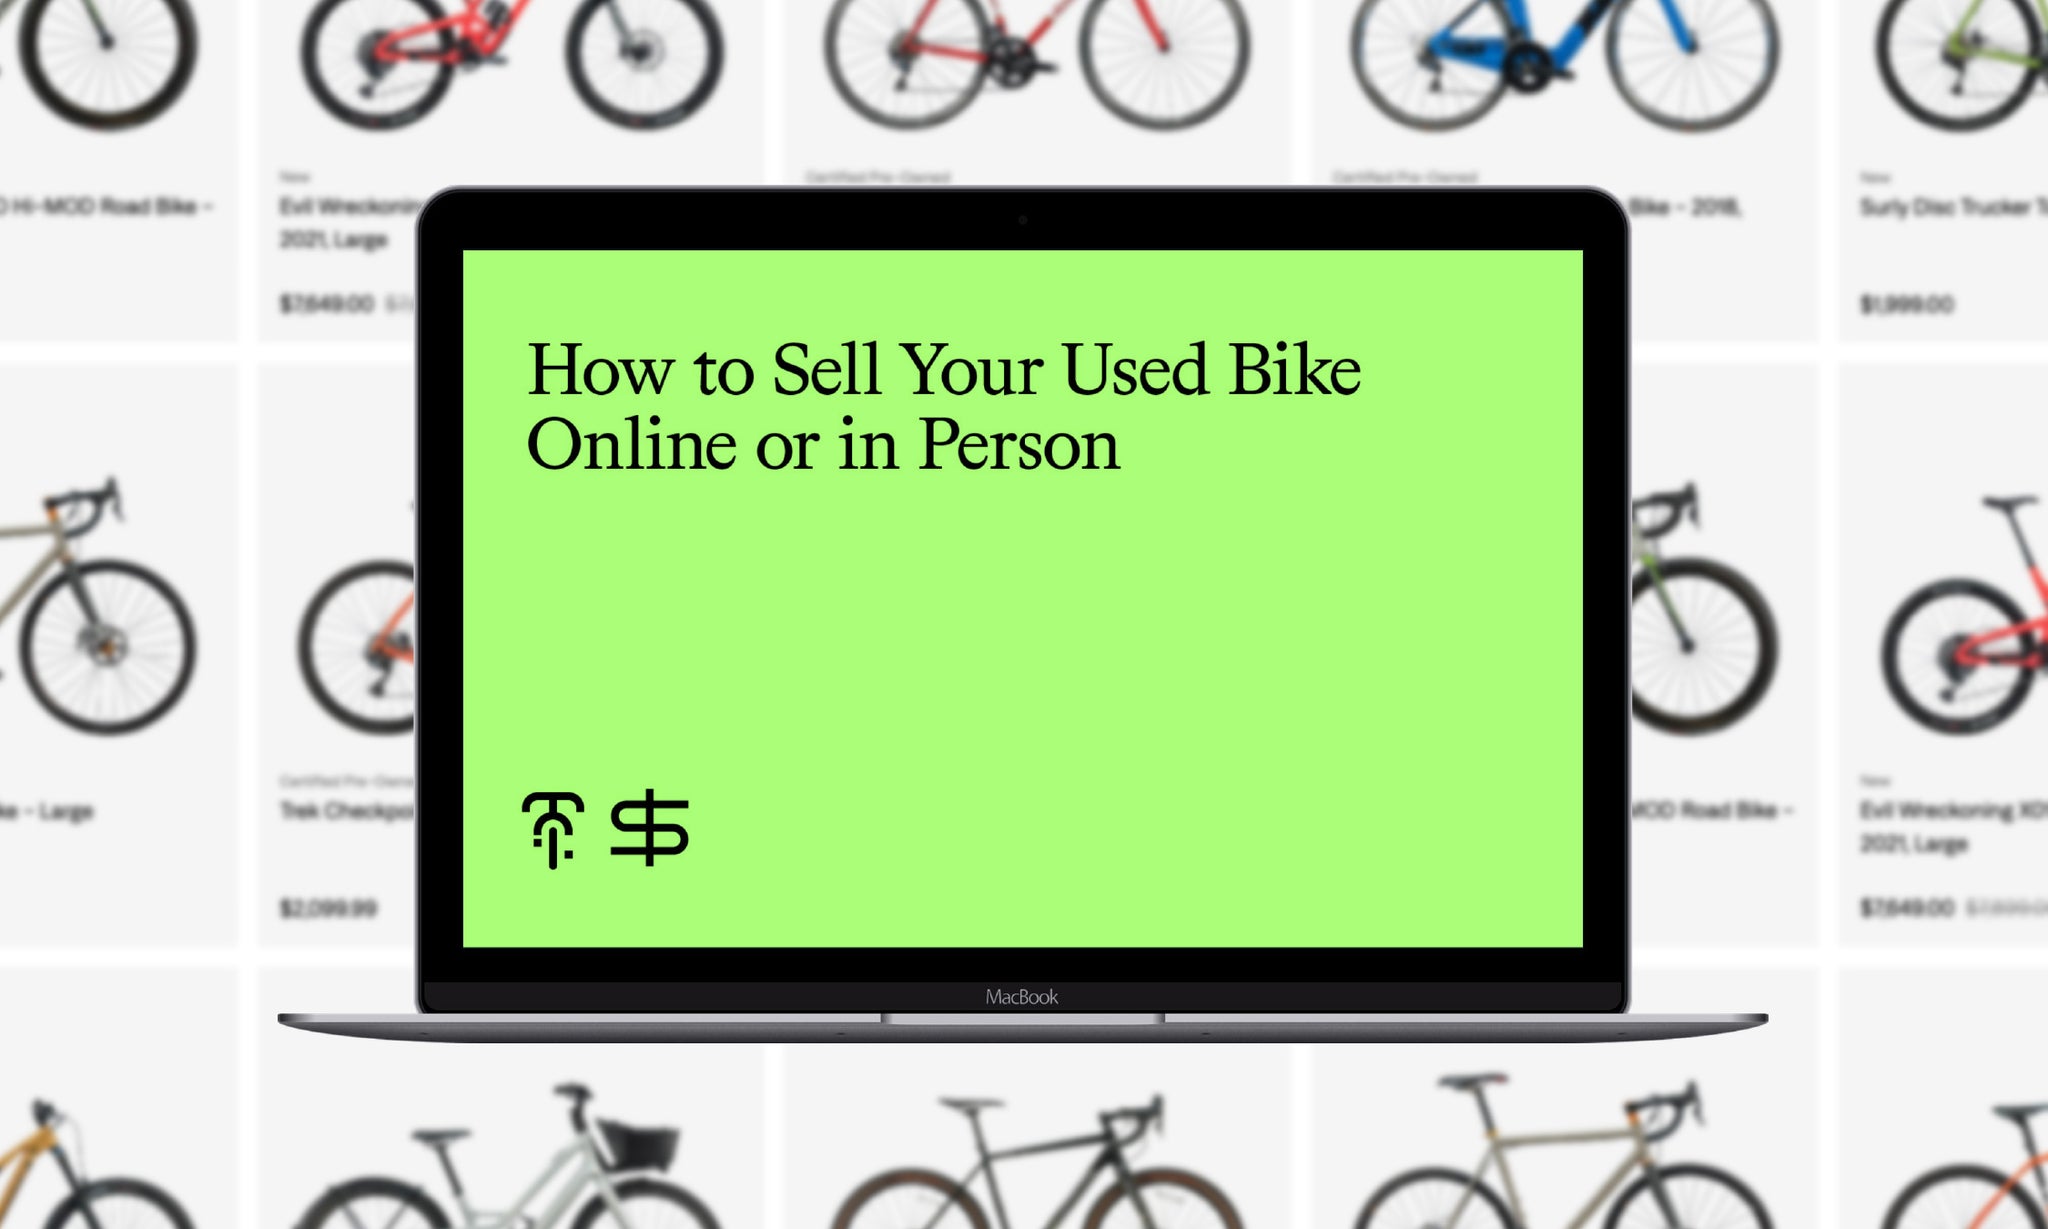 How to Sell Your Used Bike Online or in Person